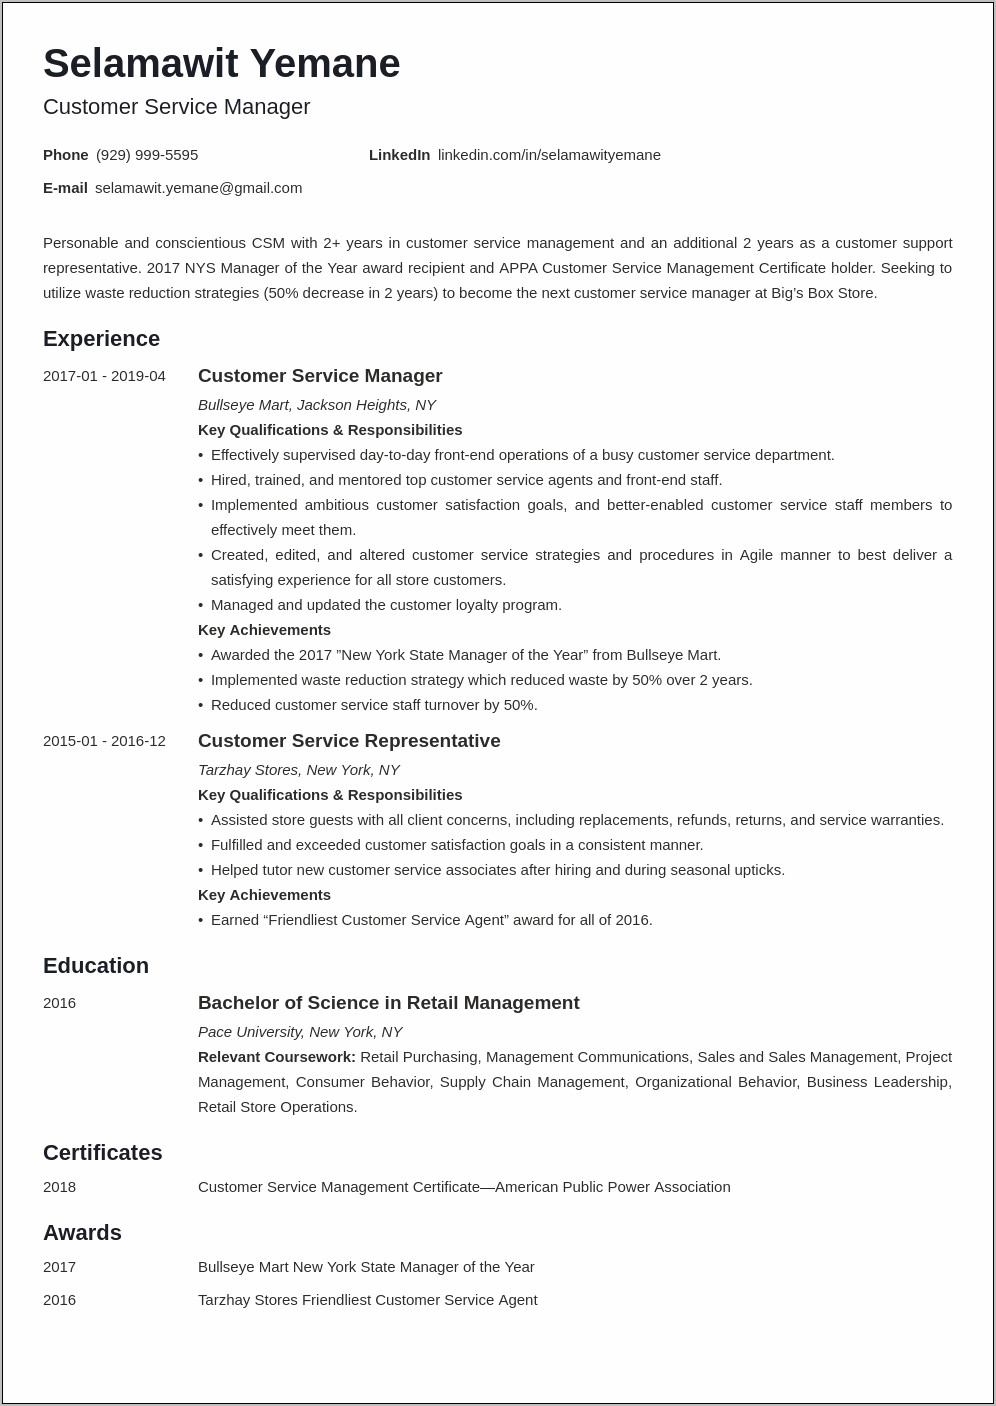 20 Years Customer Service Manager Resume Graphic